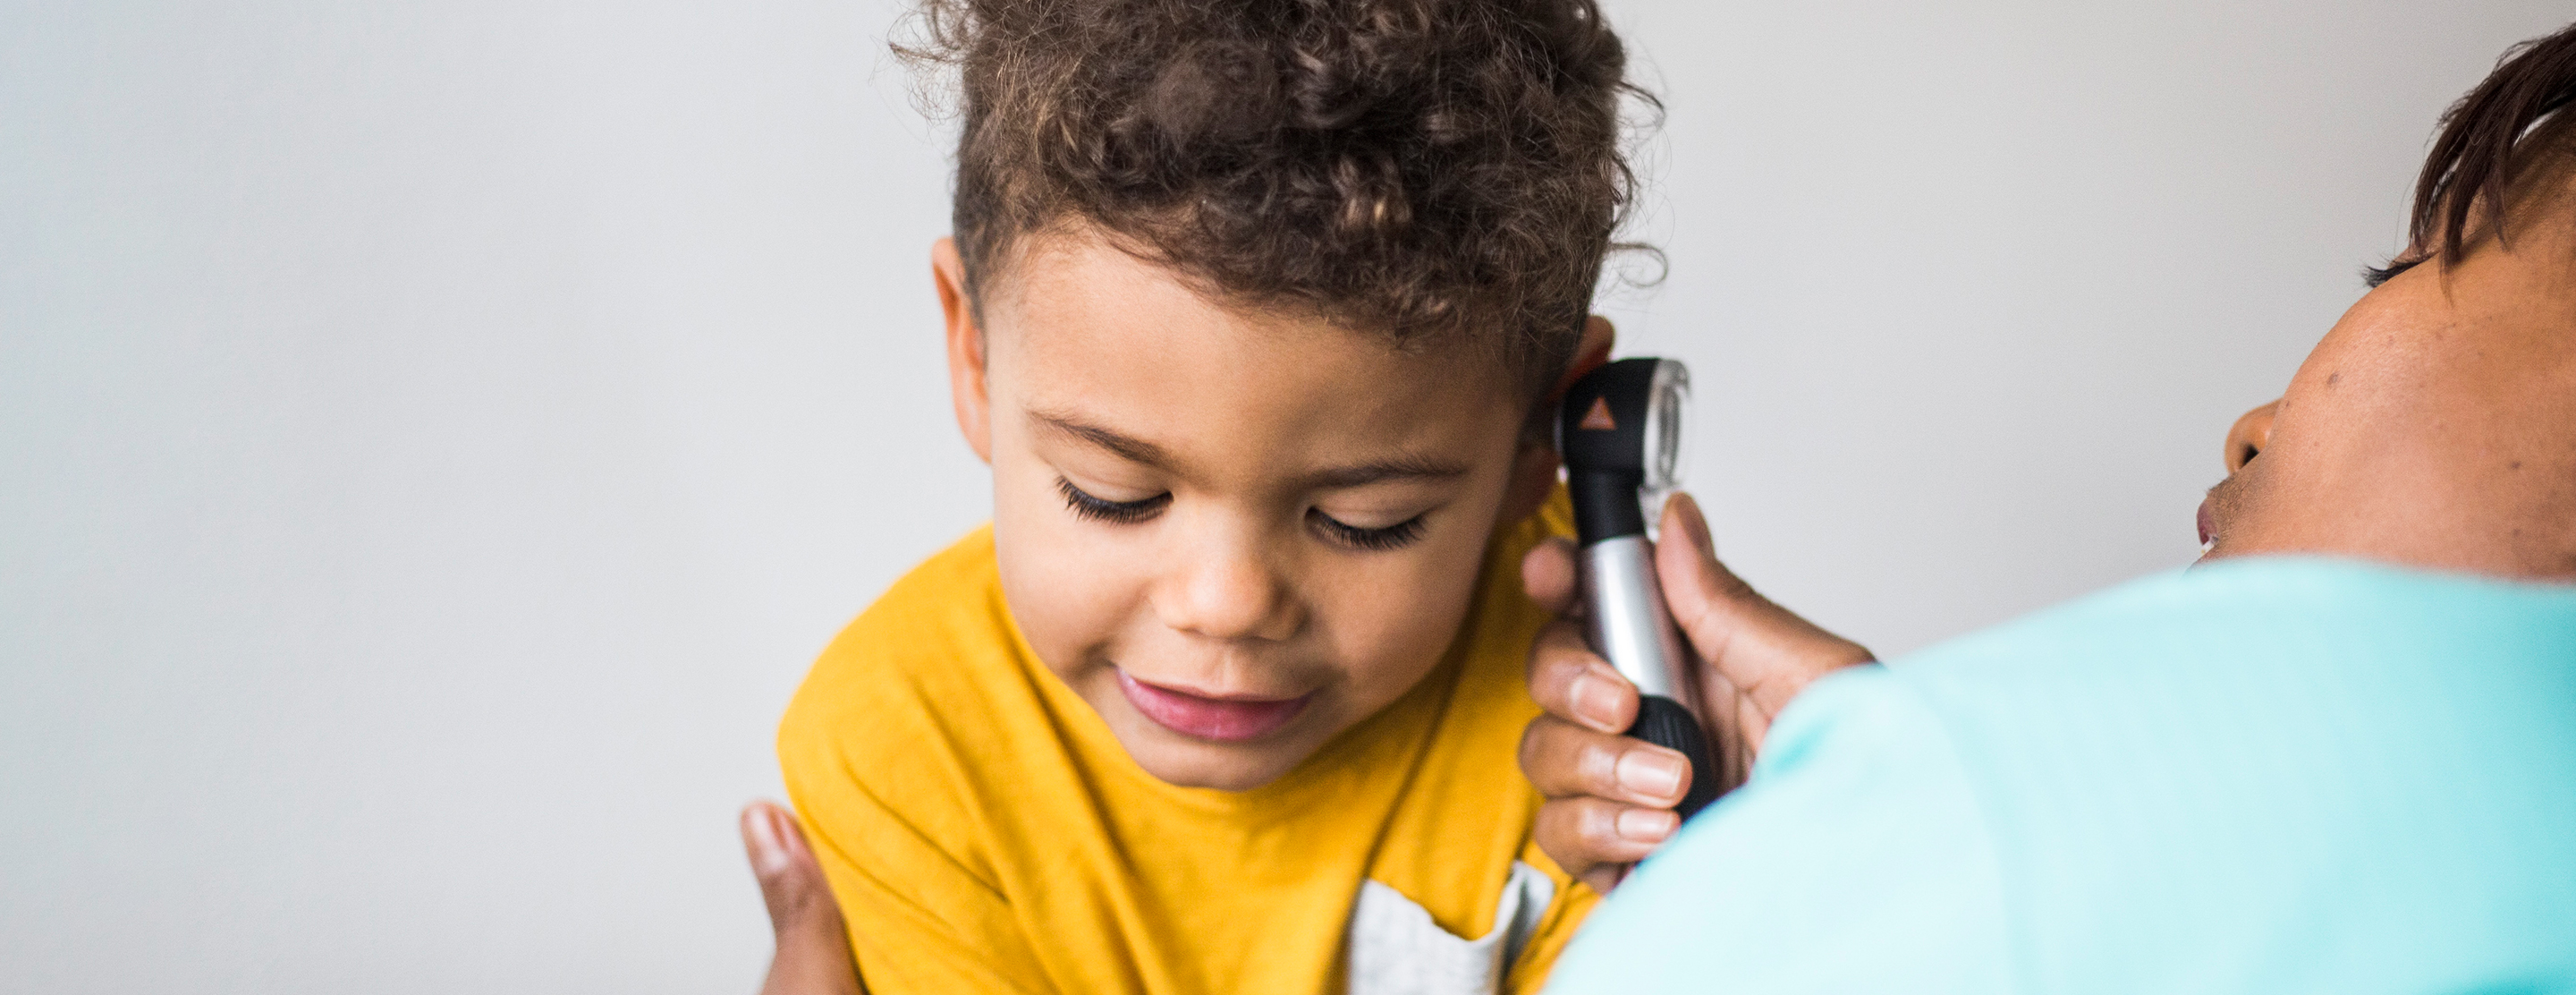 hearing-tests-for-children-2x